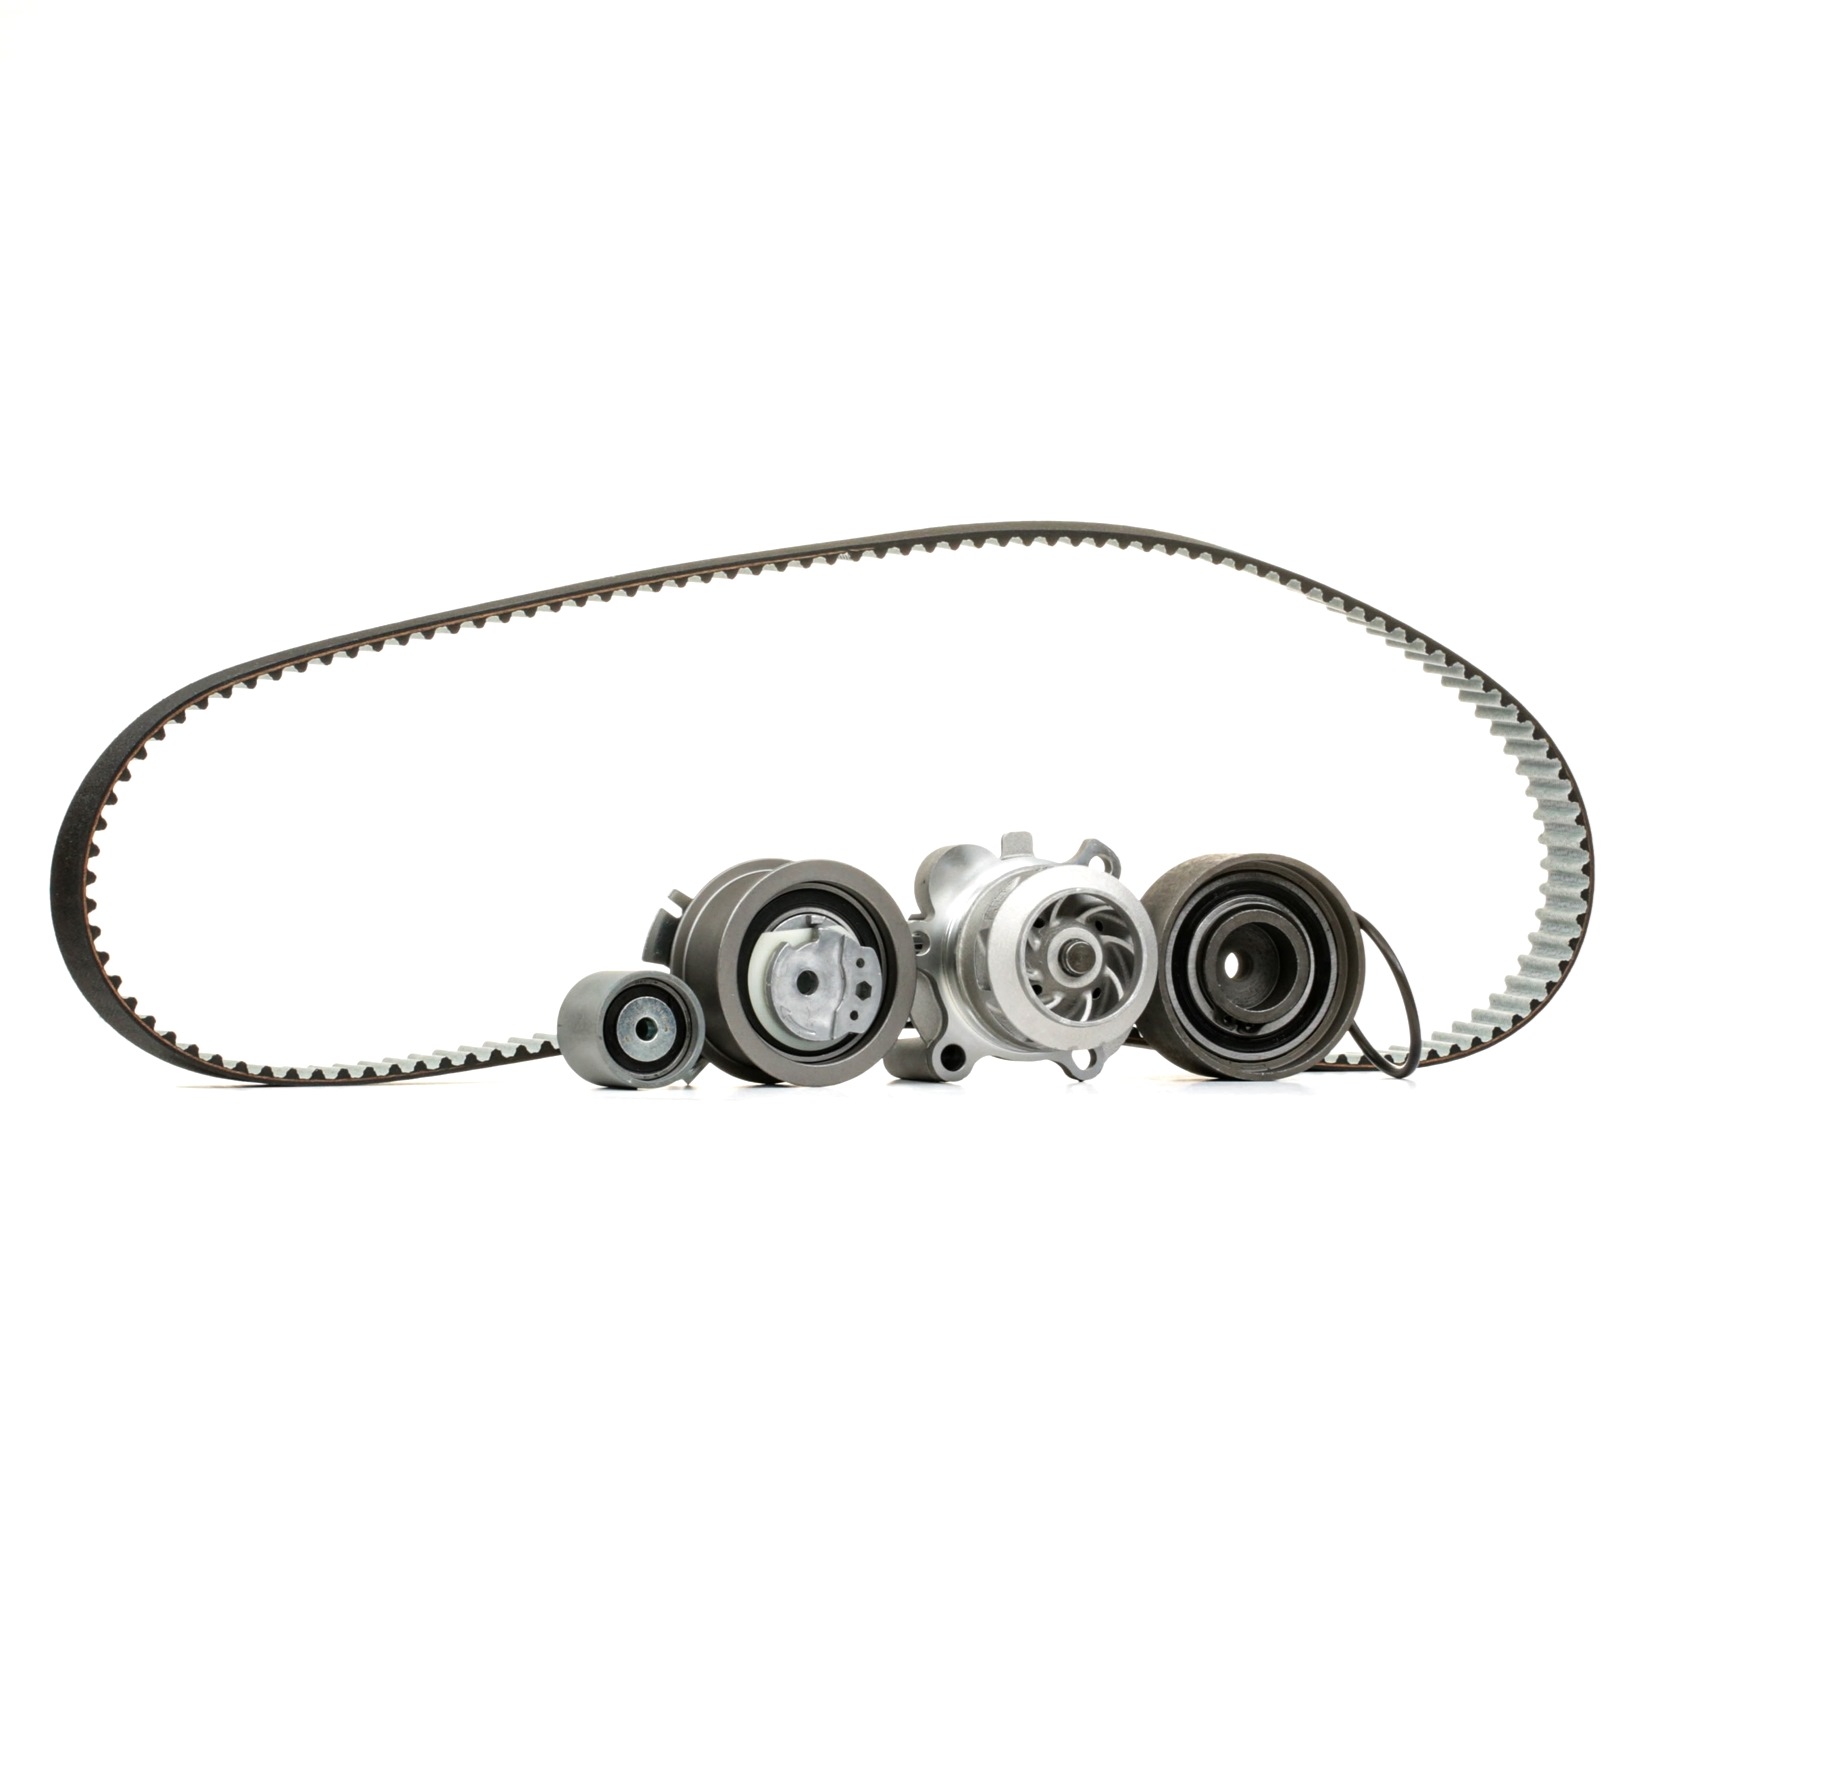 MAGNETI MARELLI 132011160065 Water pump and timing belt kit Number of Teeth: 141 L: 1343 mm, Width: 30 mm